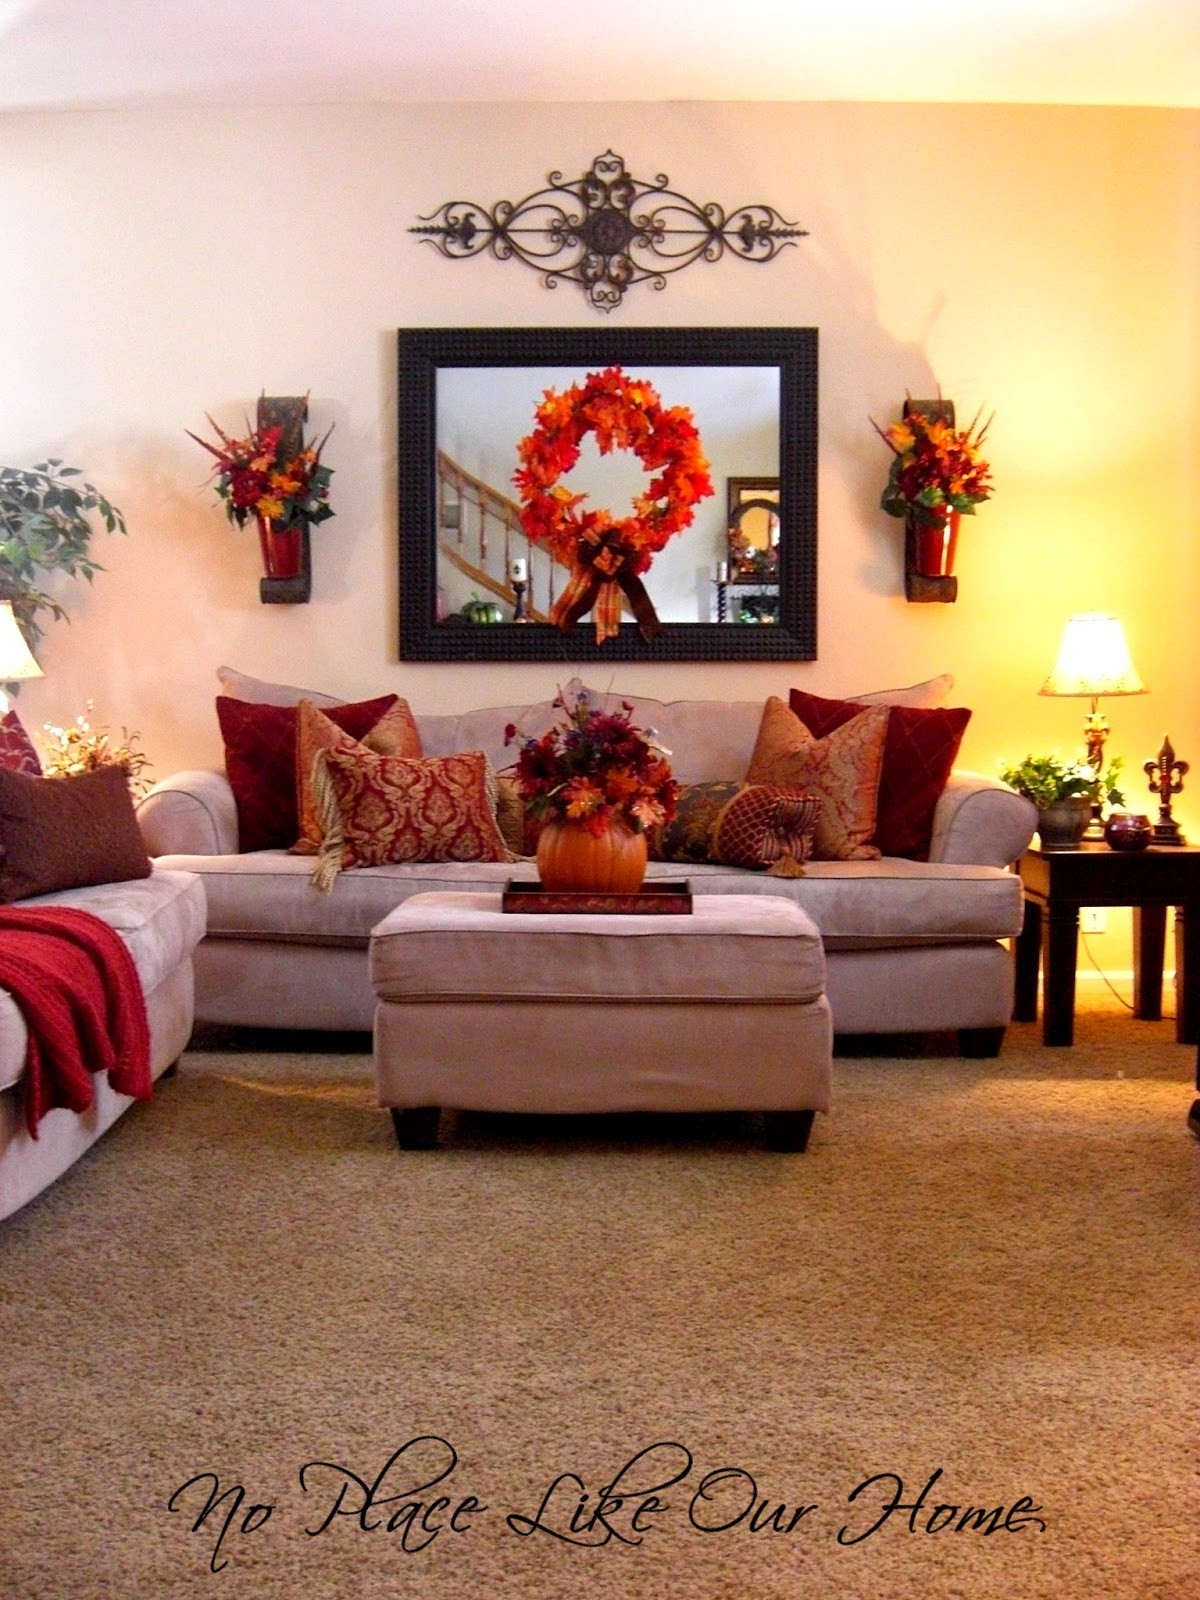 Living Room Centerpieces Ideas
 No Place Like Our Home Front Living Room Fall Tour 2012